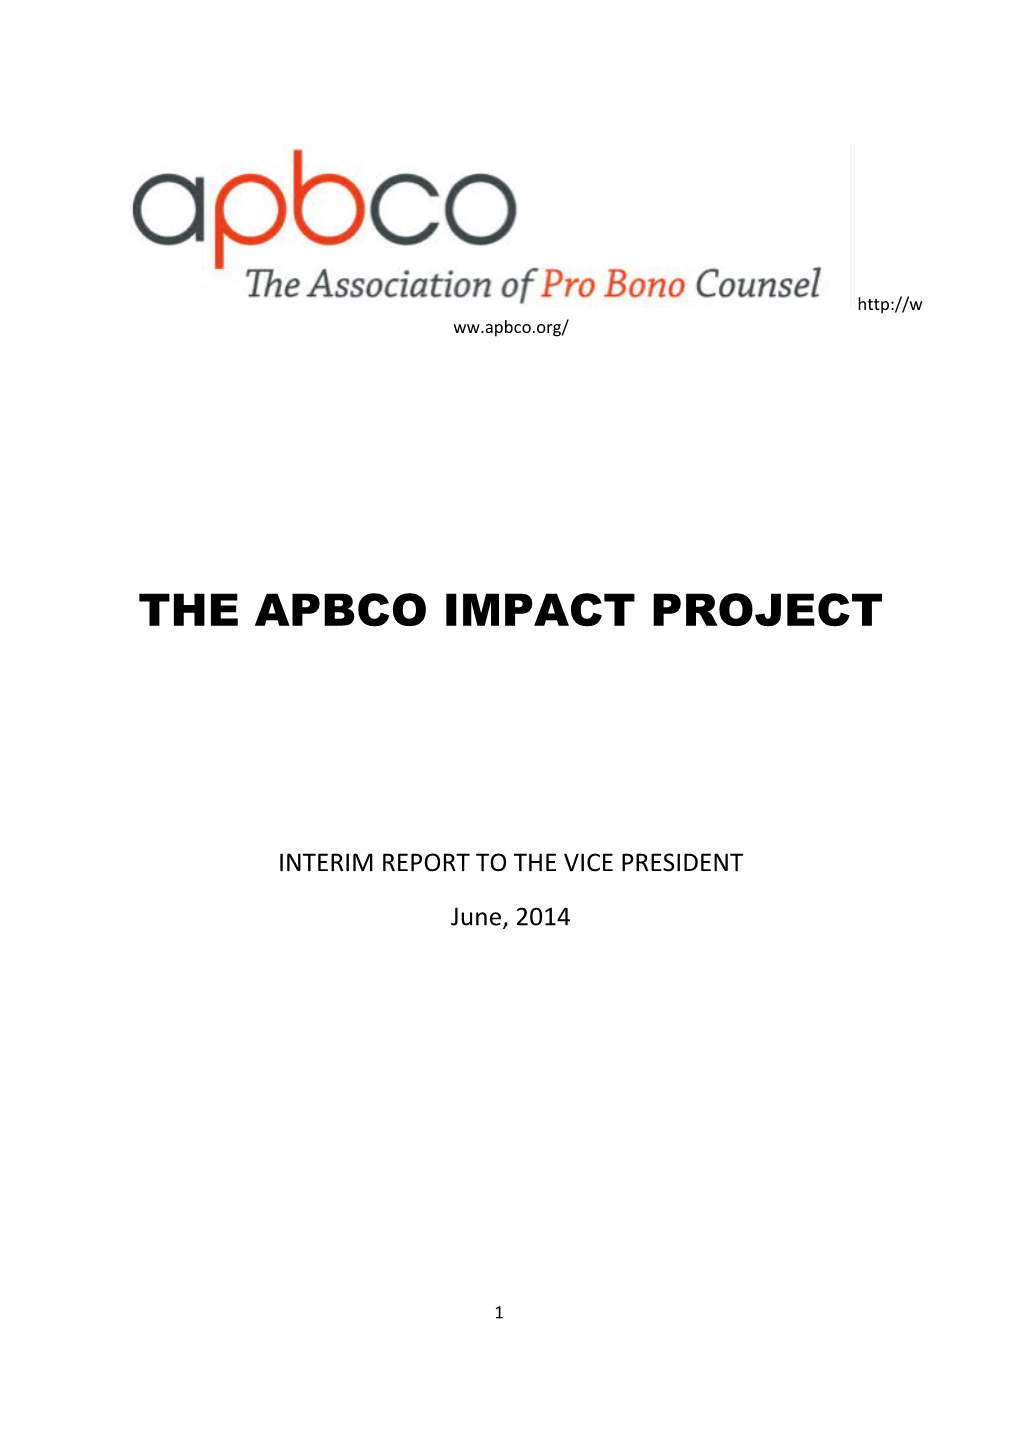 The Apbco Impact Project